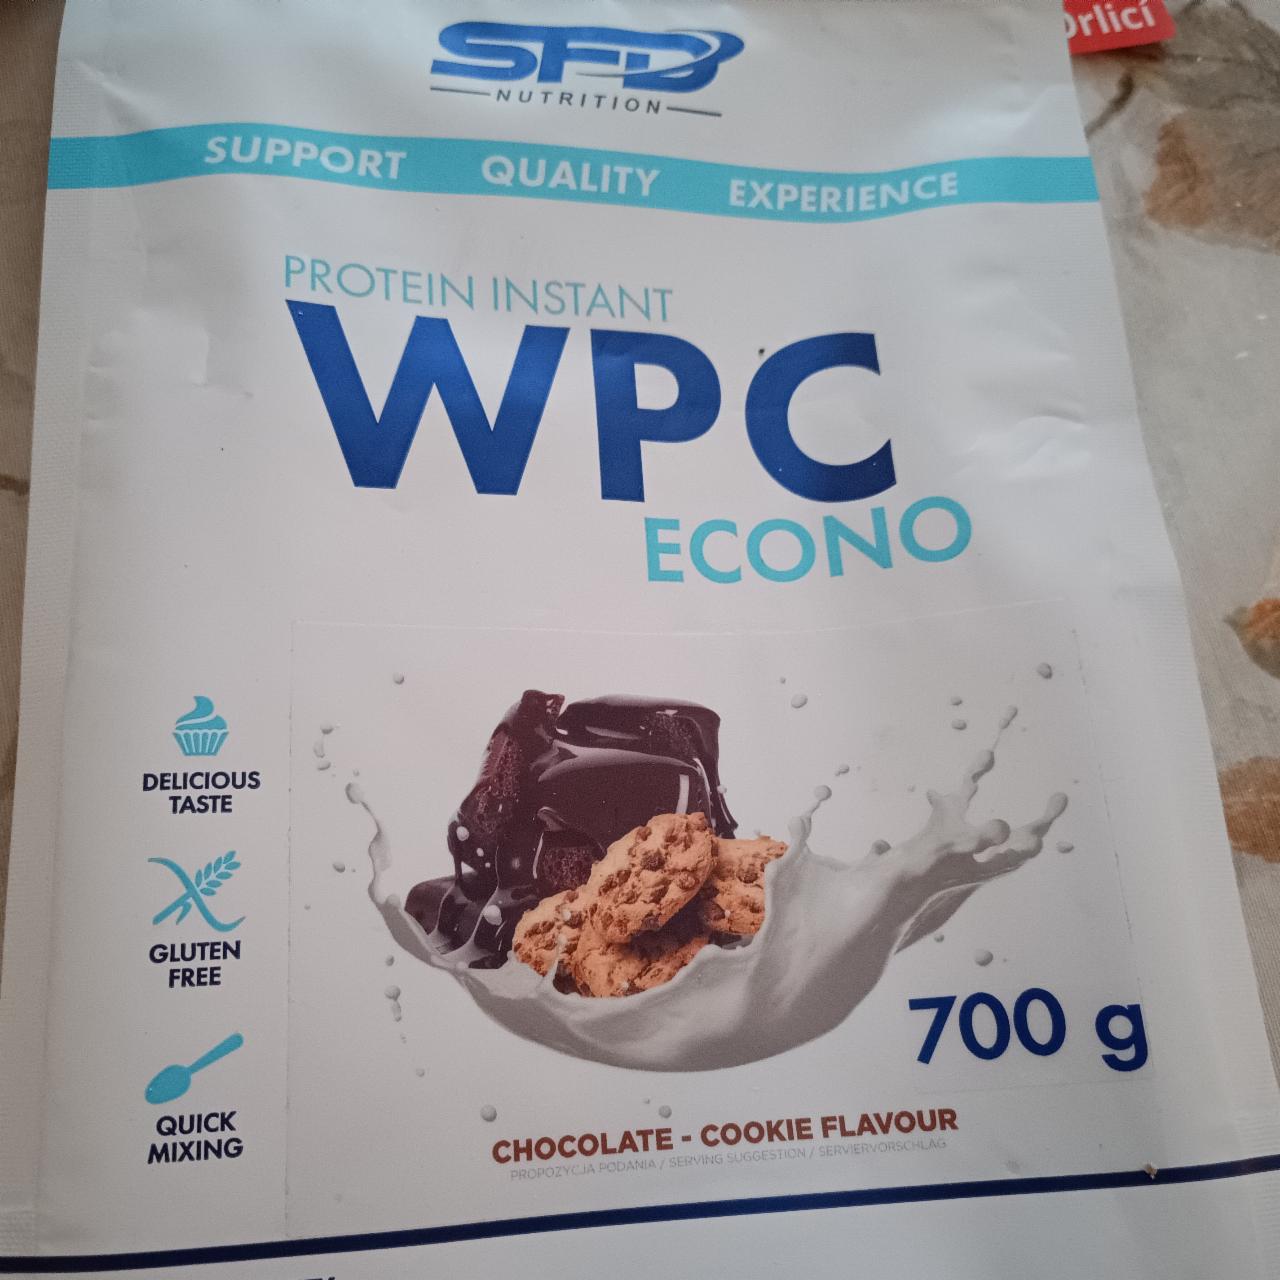 Fotografie - Protein instant WPC Econo Chocolate-Cookies flavour SFD Nutrition